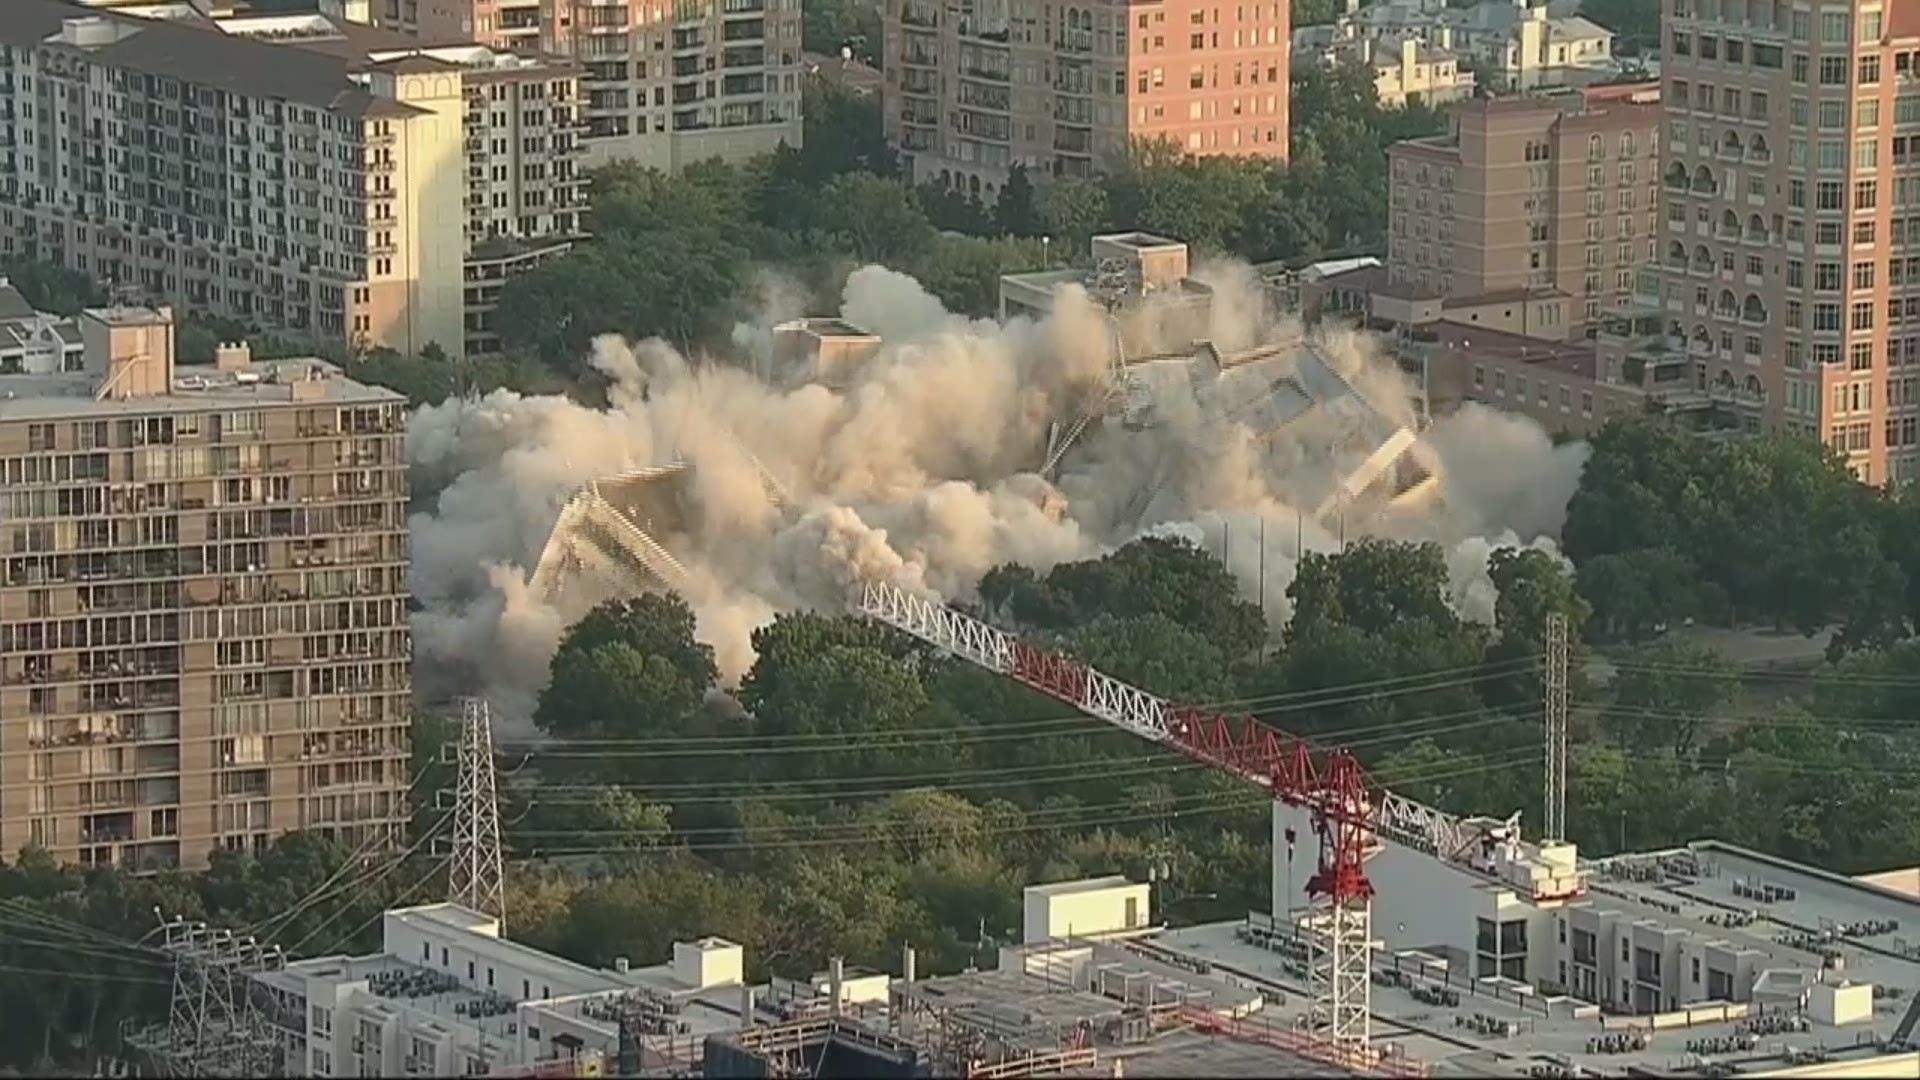 A 9-story building was imploded Sunday morning in Uptown Dallas. The implosion happened at the 2727 block of Turtle Creek Boulevard.